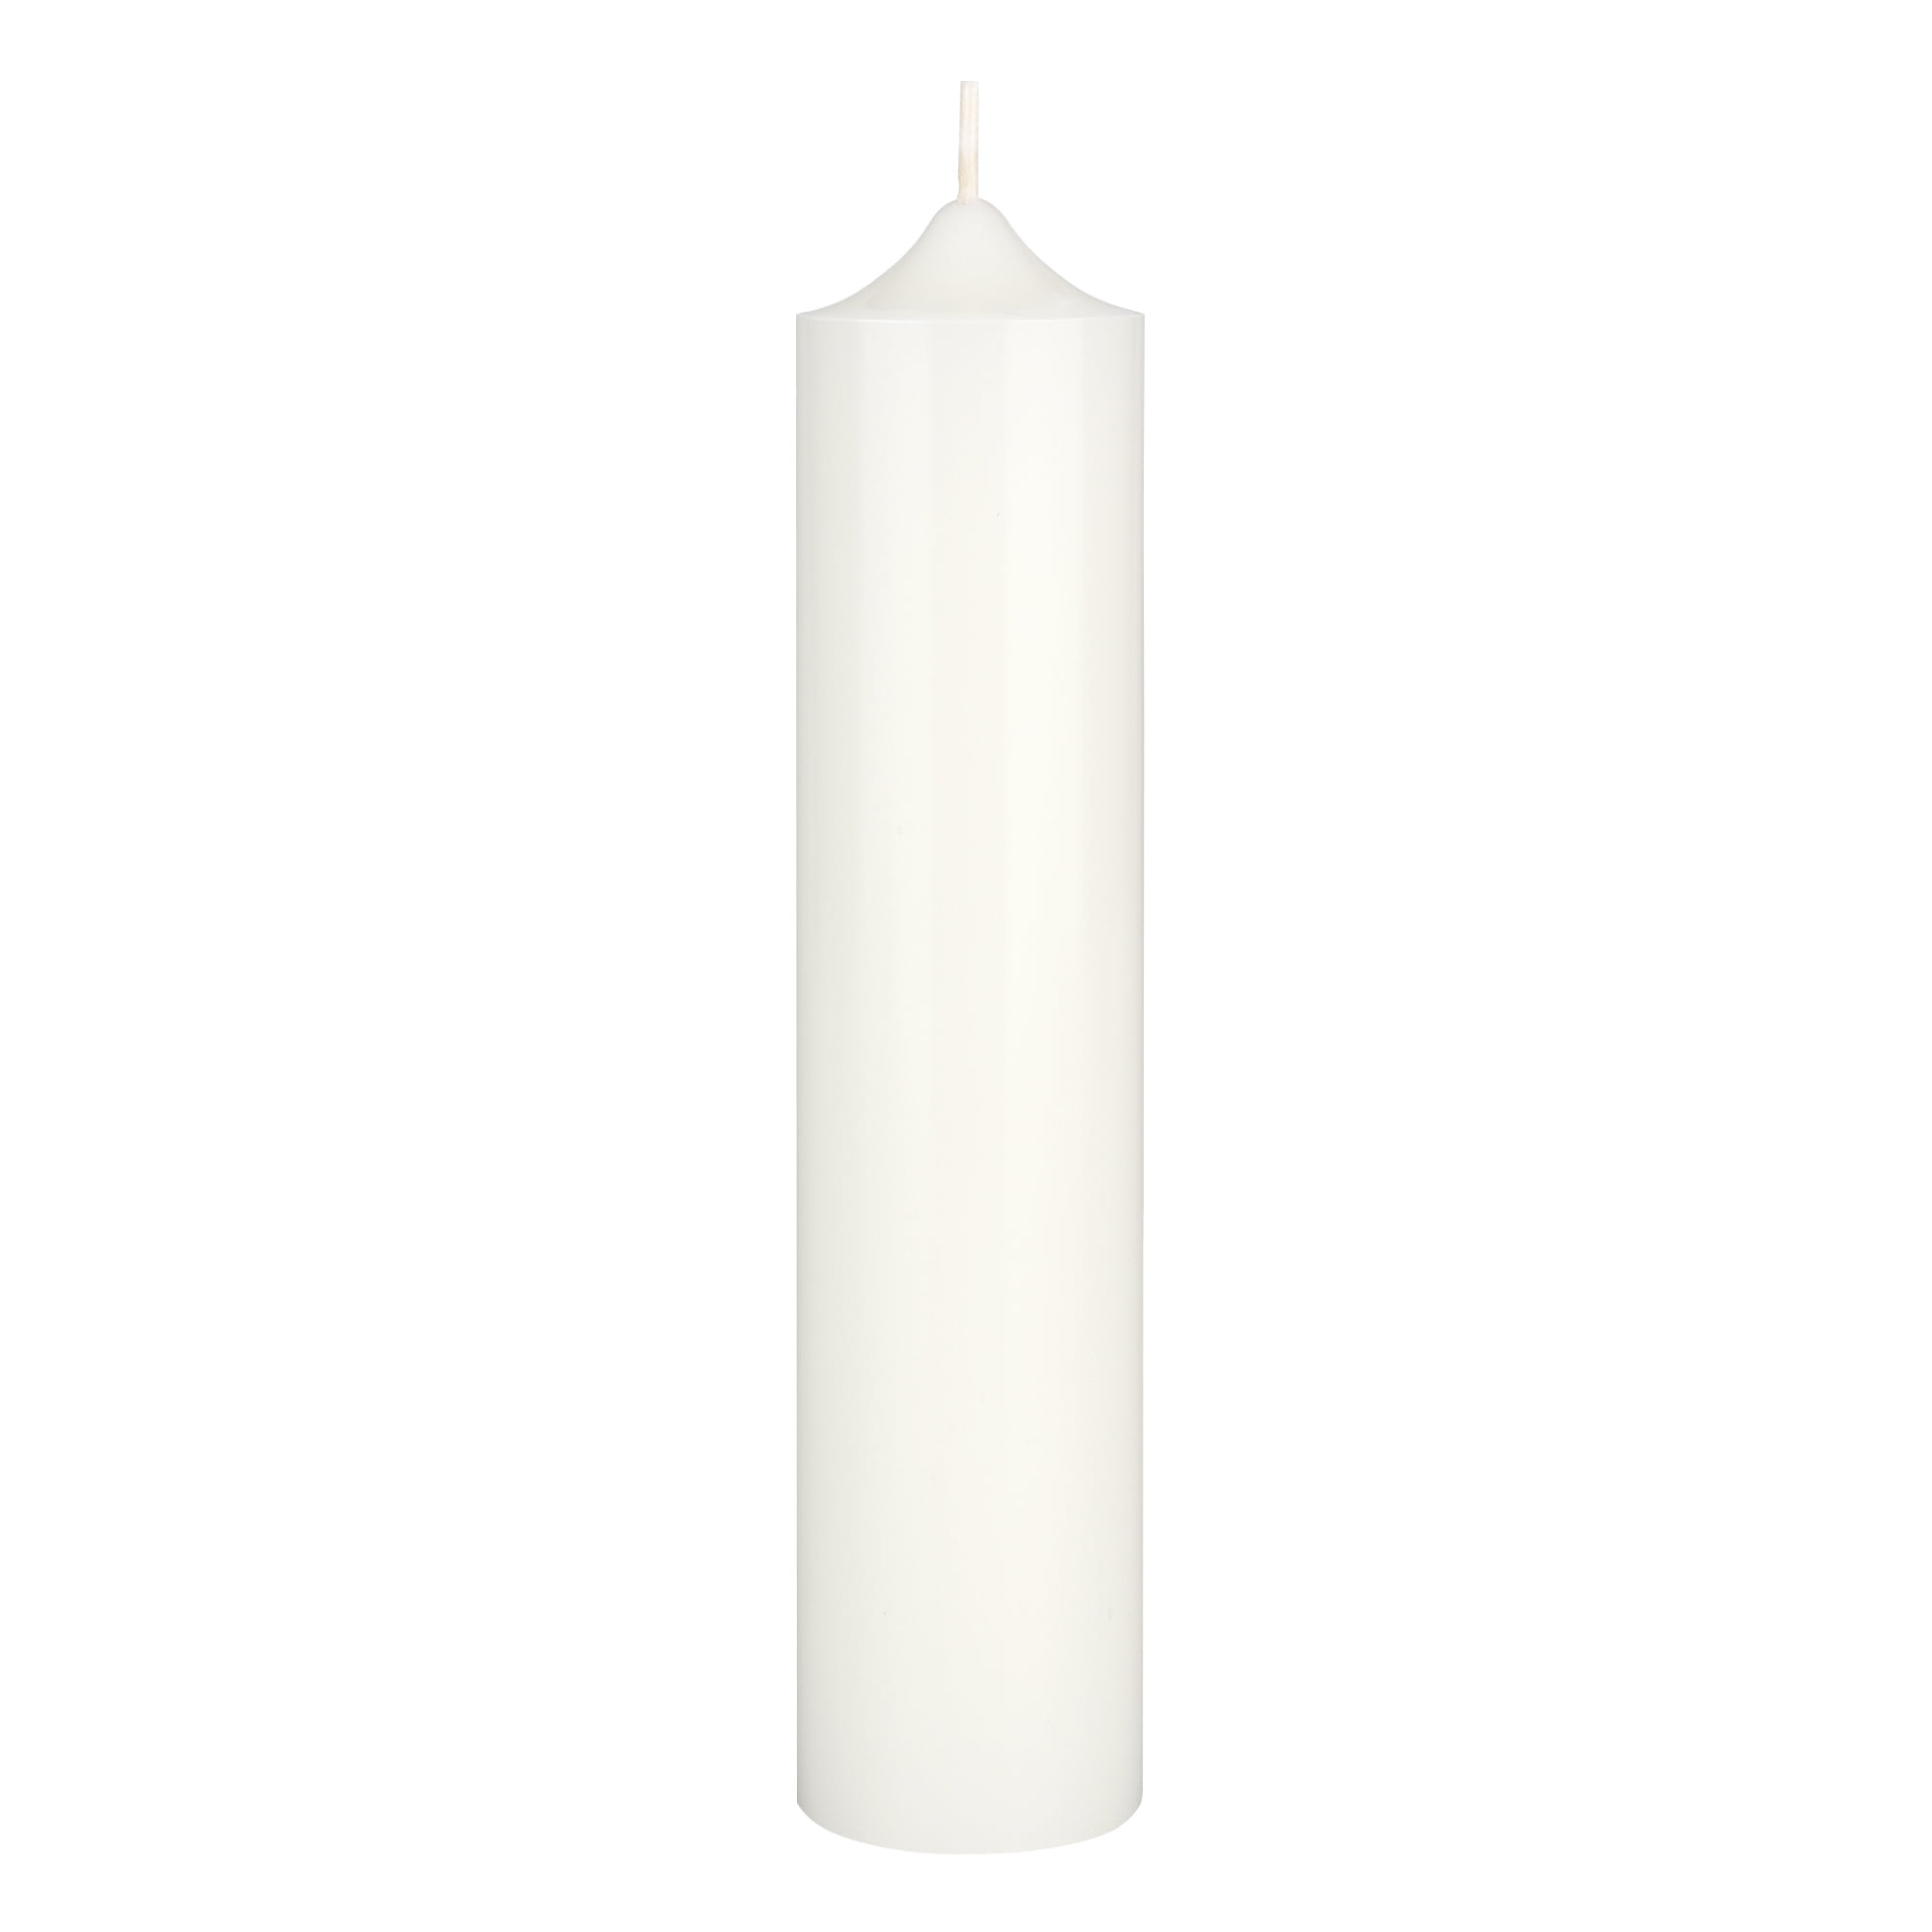 Candle-lite Plumbers Candle 5416595 Pack of 200 for sale online 